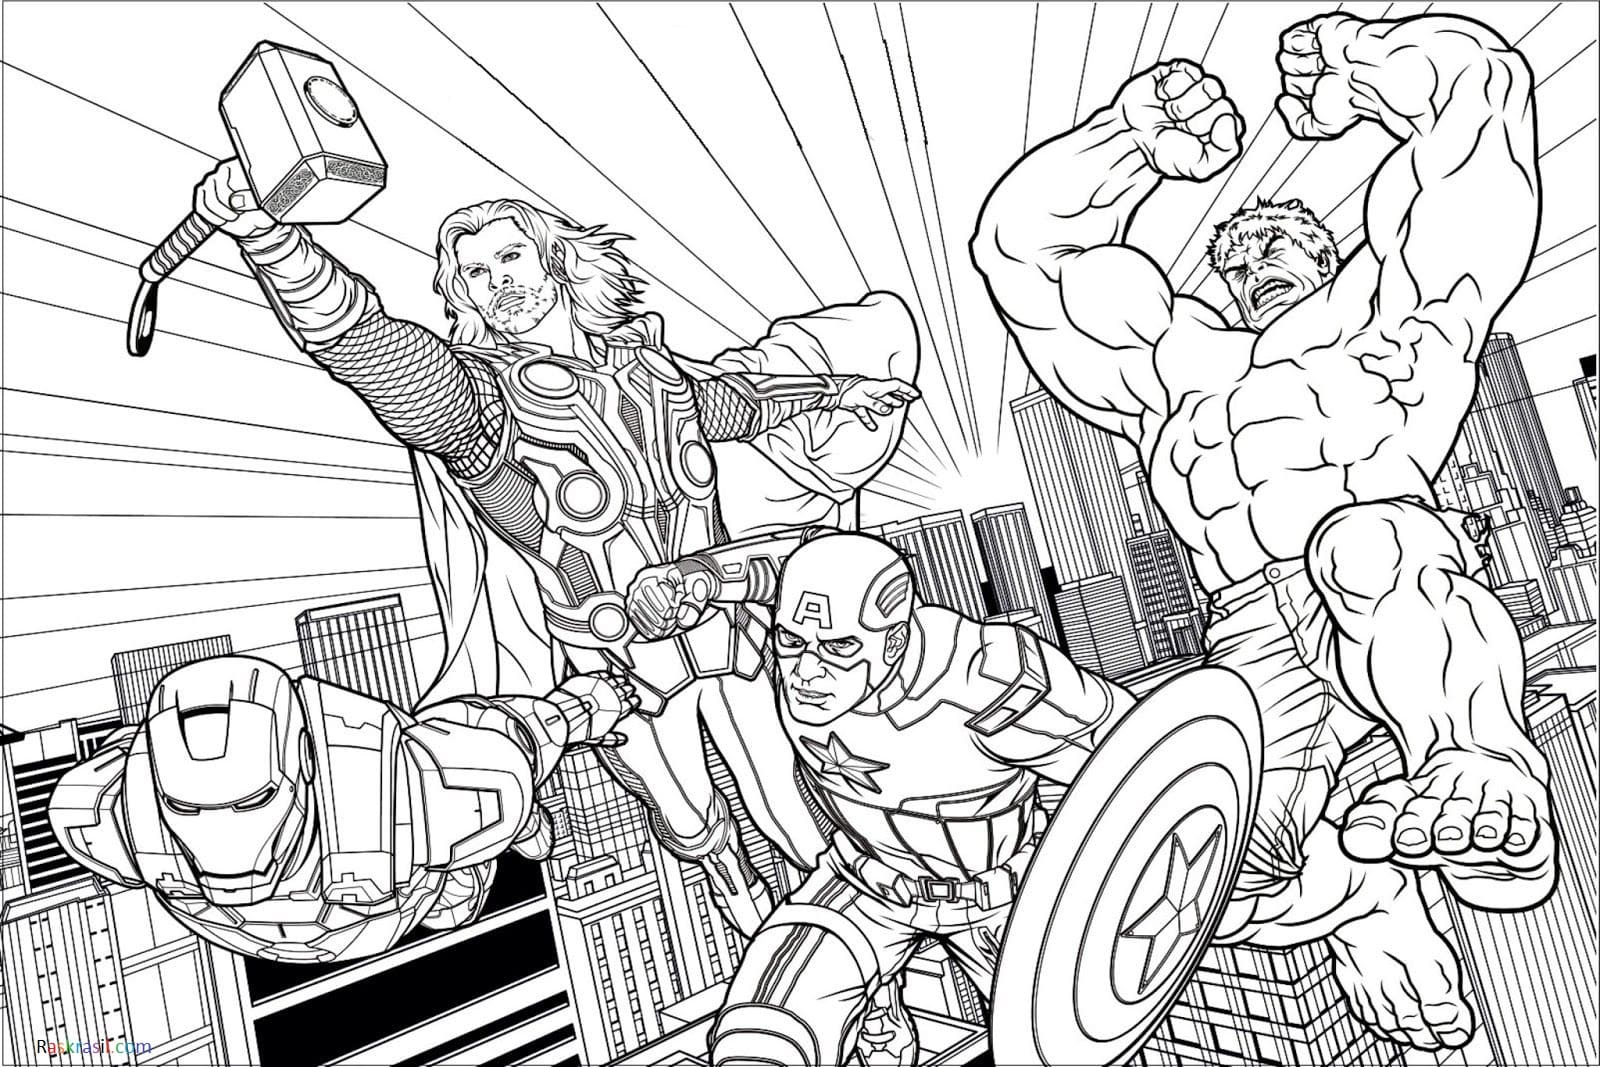 Avengers 18 of Avengers coloring page to print and color